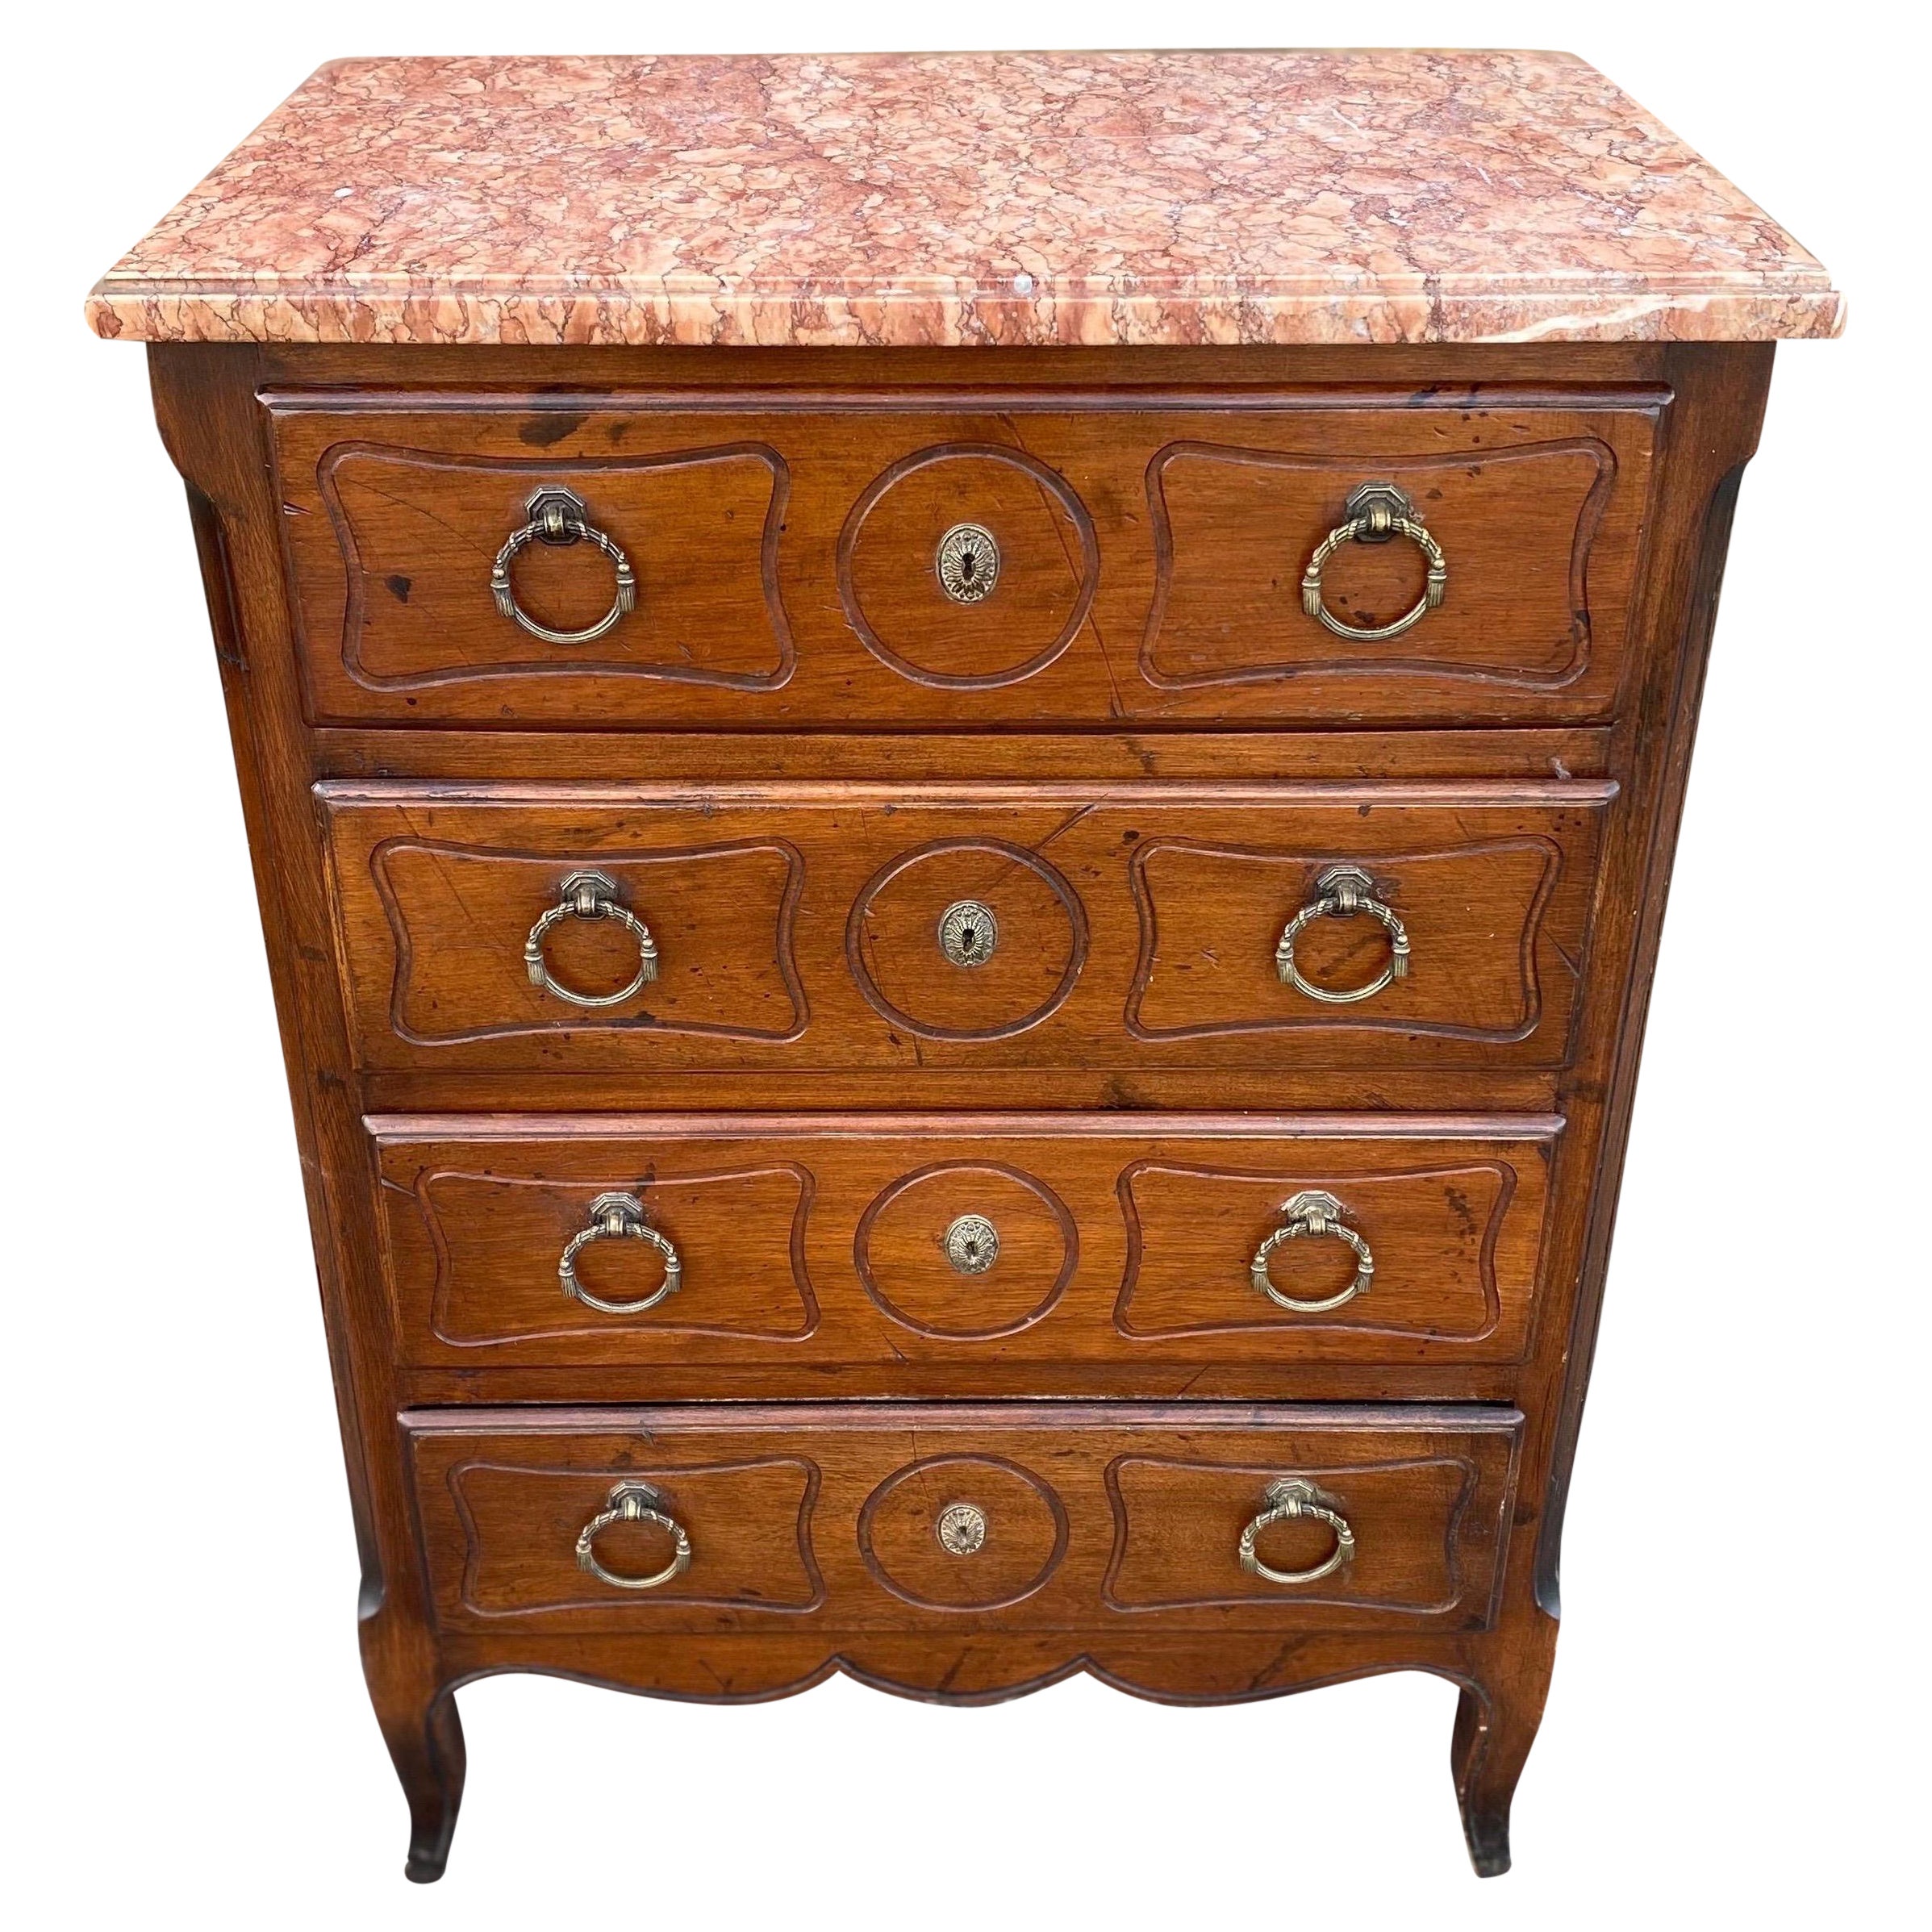 19th Century French Marble Top Bedside Chest